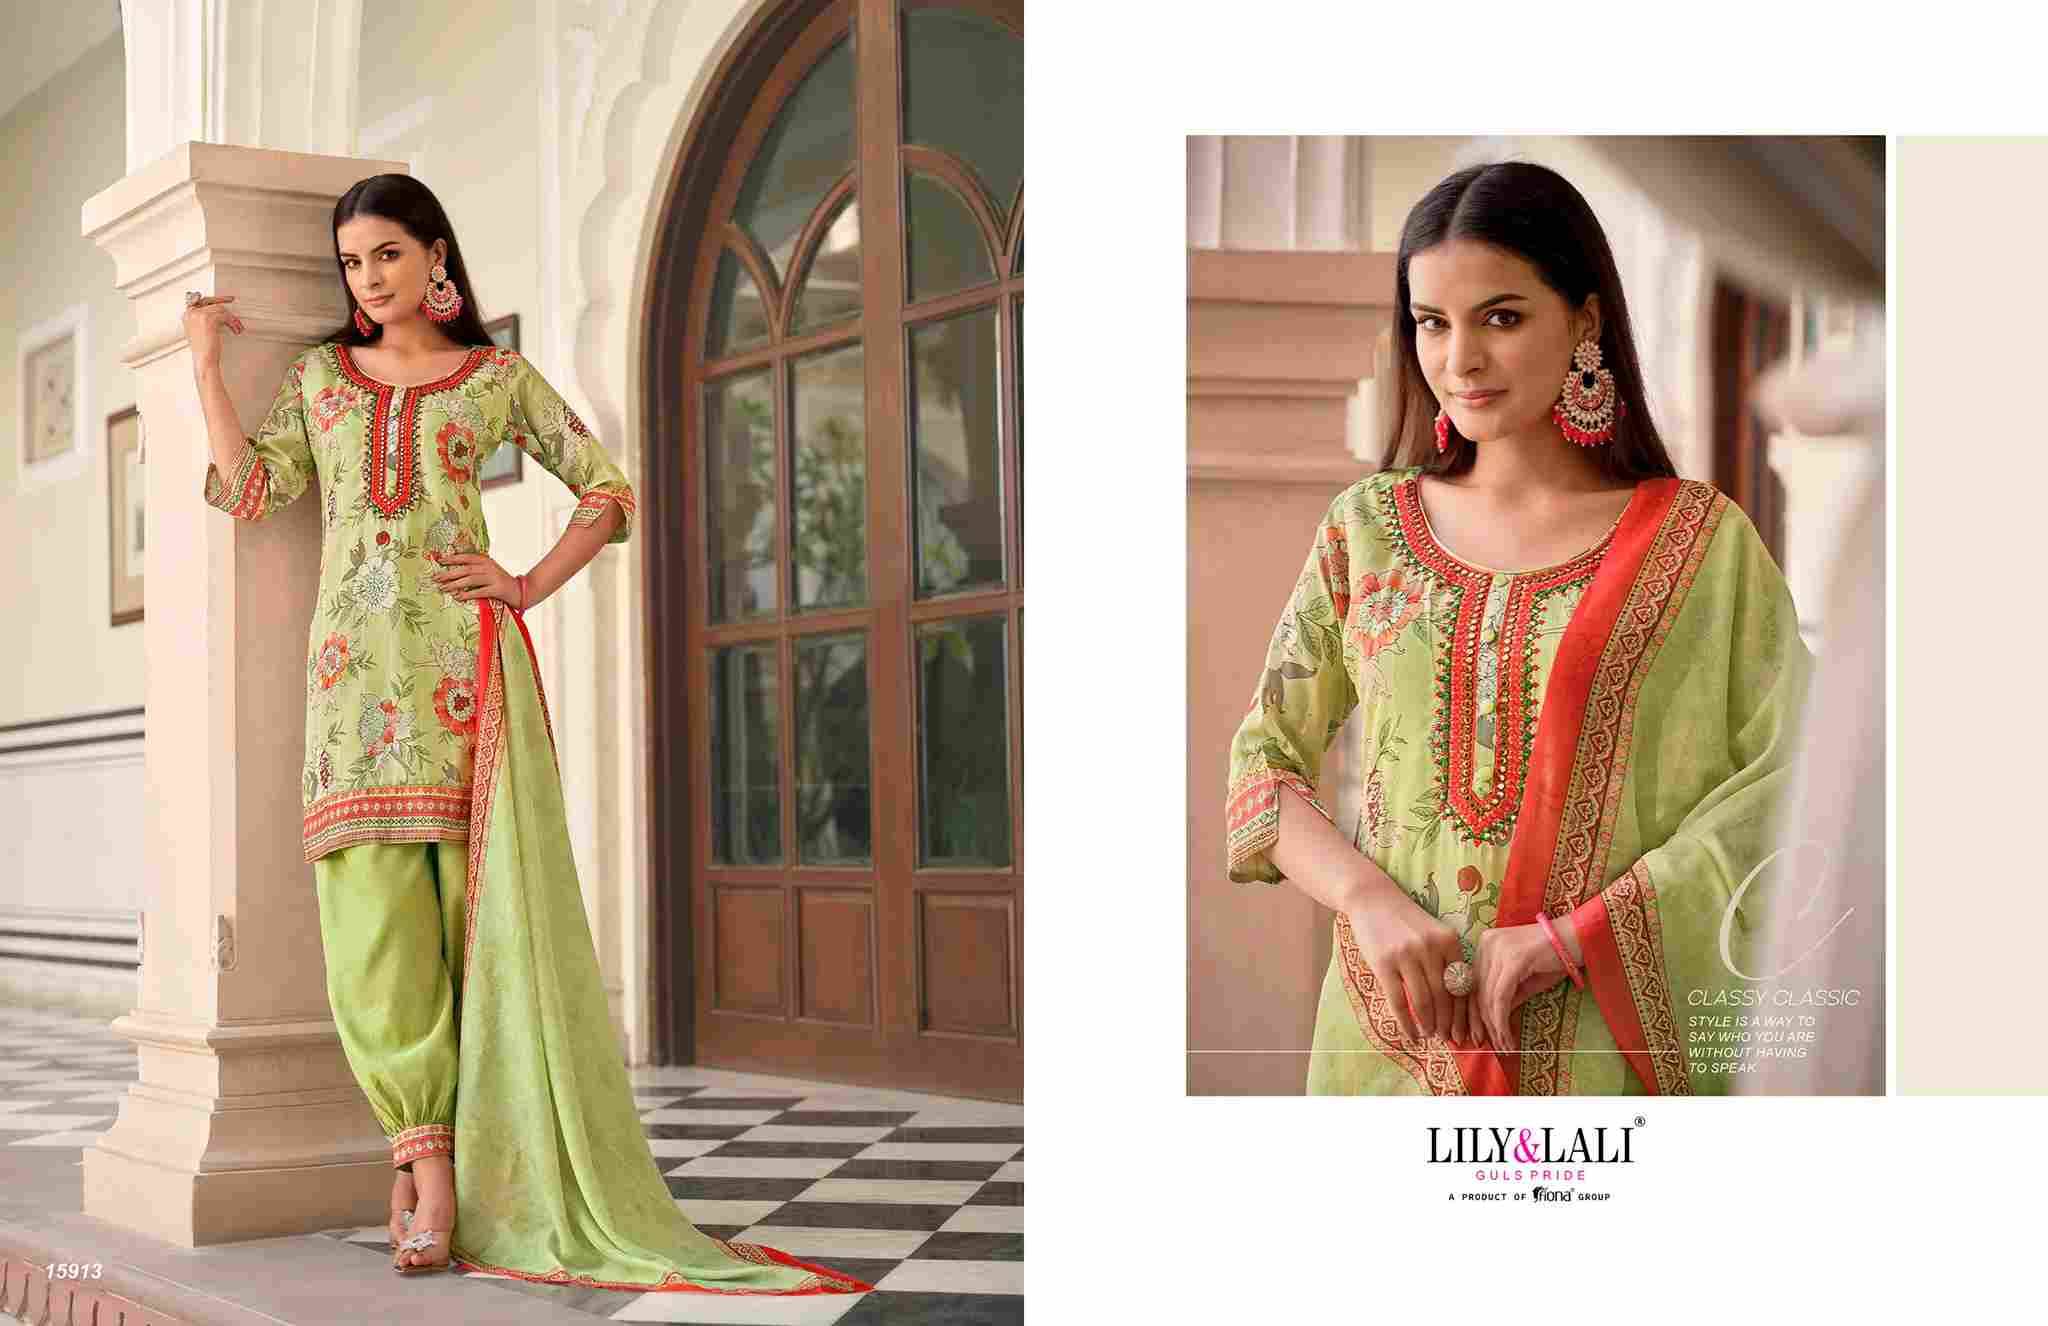 Mehnoor By Lily And Lali 15911 To 15916 Series Festive Suits Beautiful Fancy Colorful Stylish Party Wear & Occasional Wear Muslin Silk Dresses At Wholesale Price